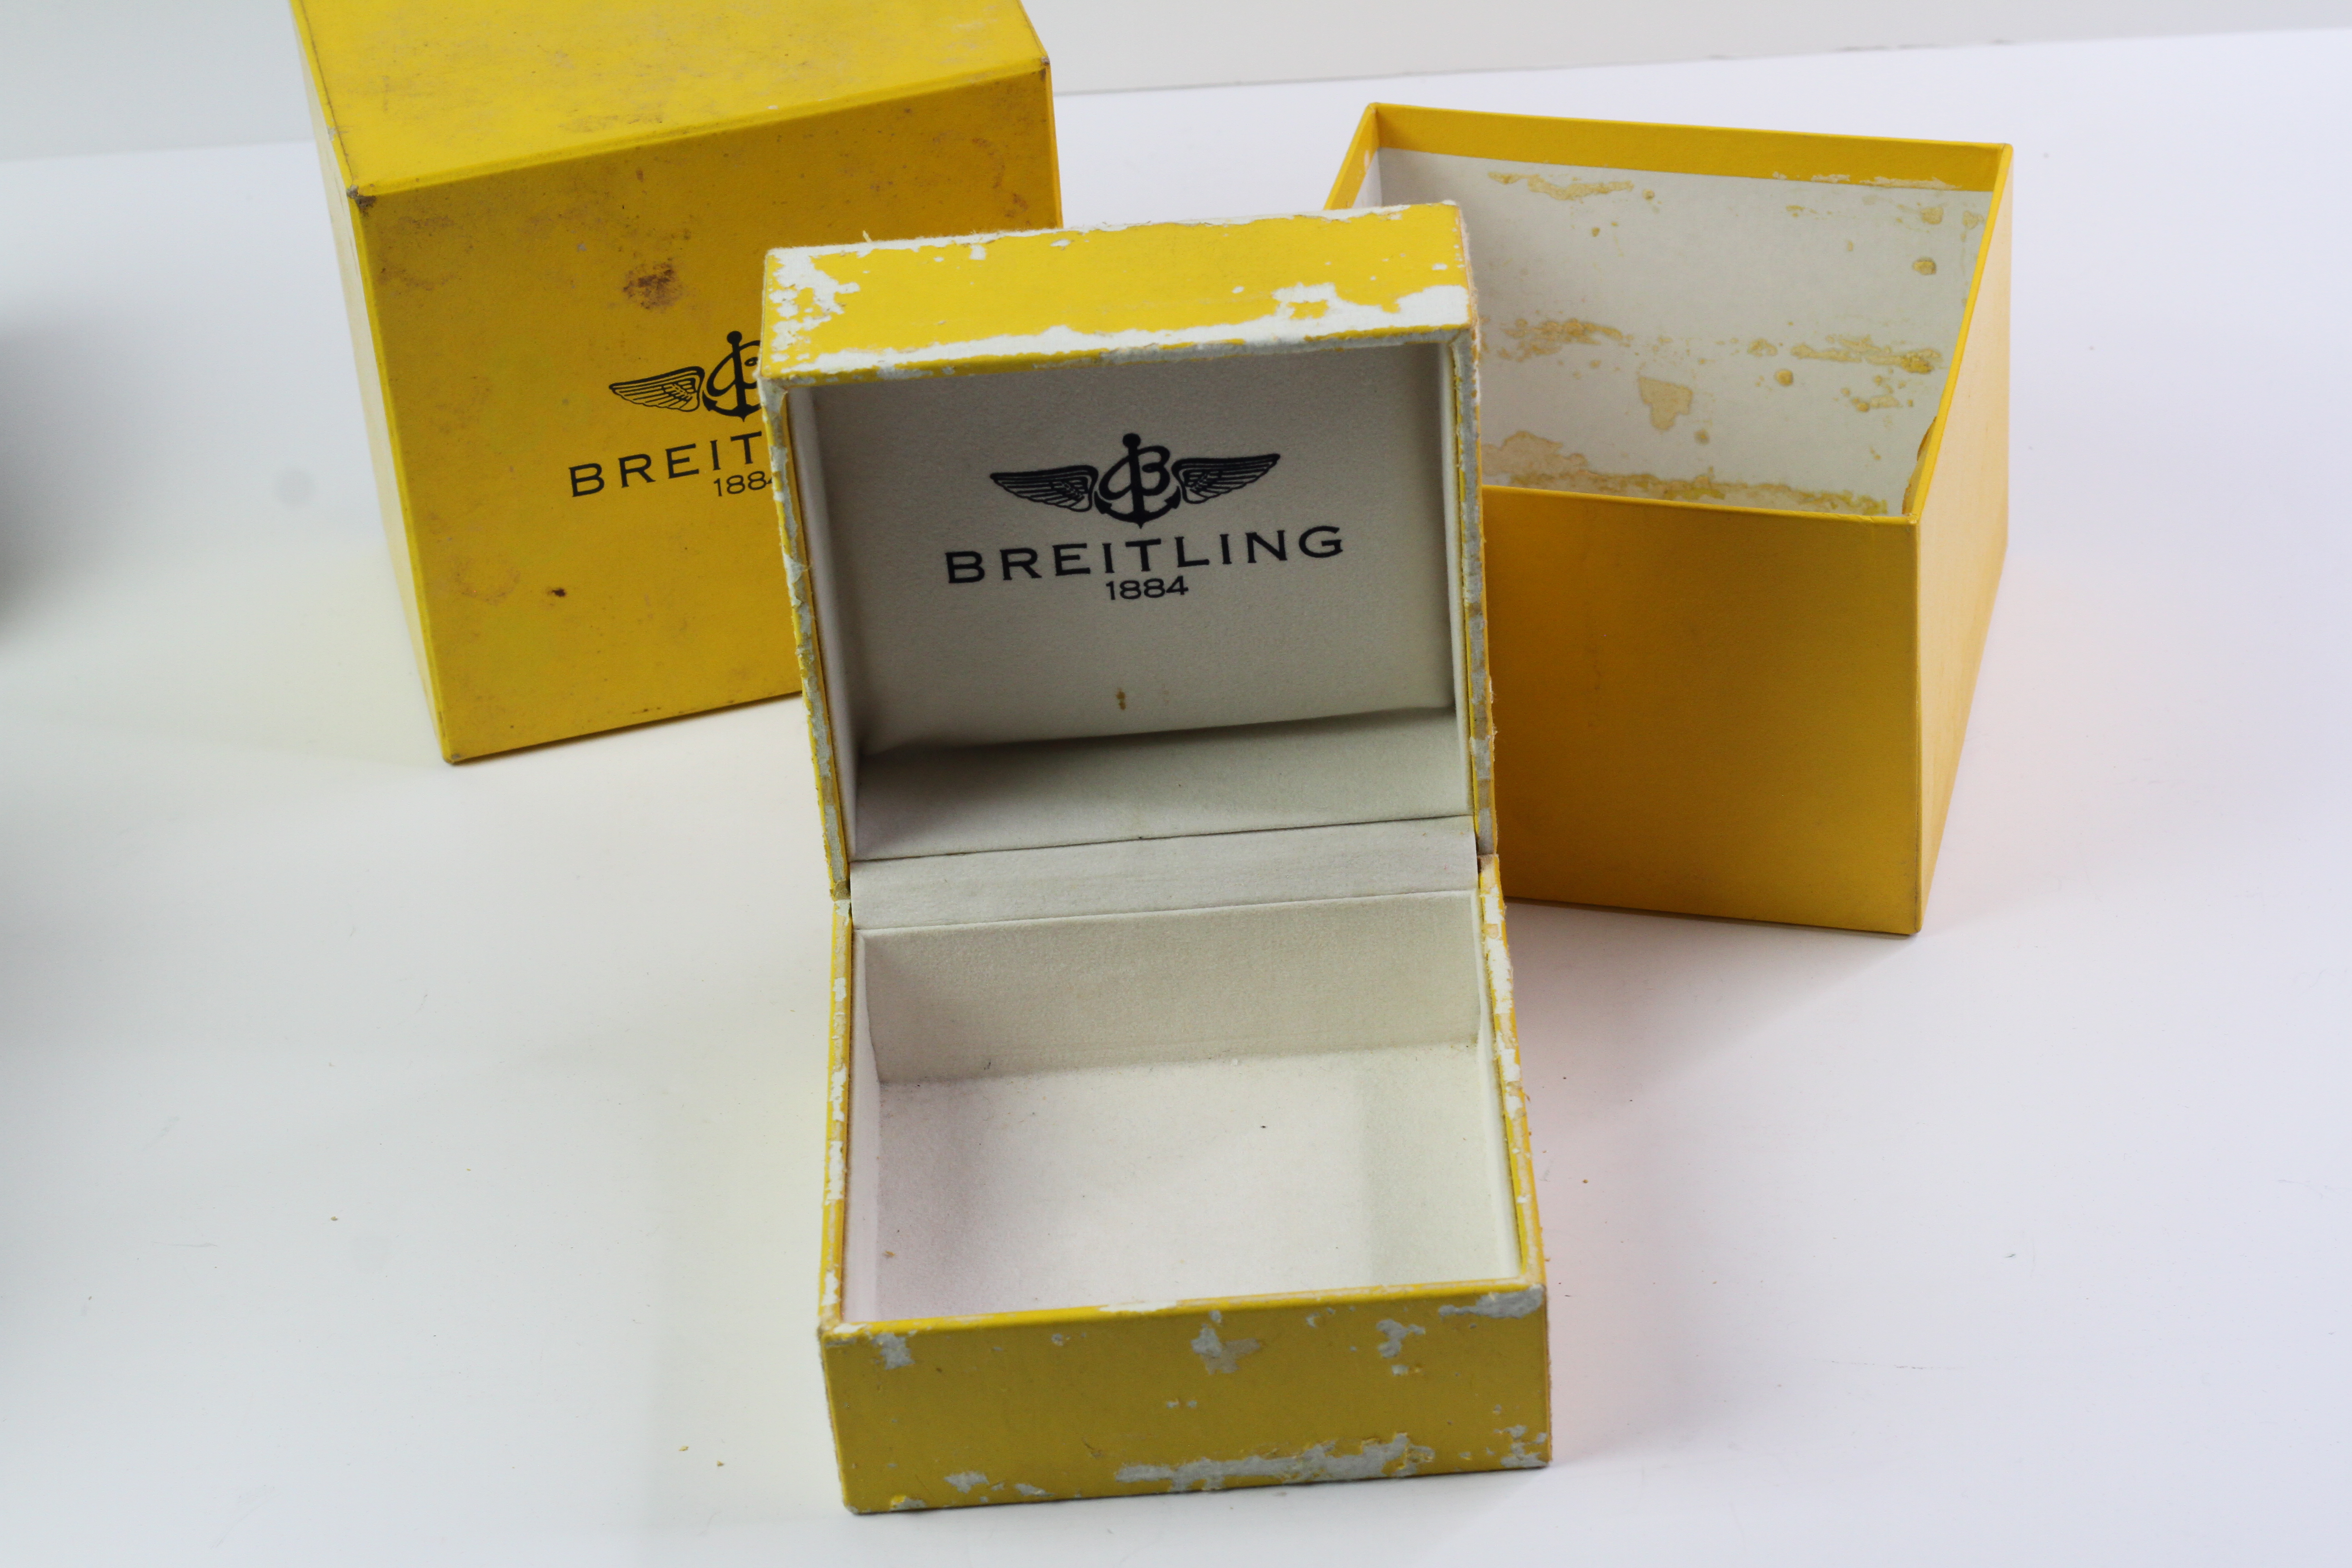 *To Be Sold Without Reserve* 2 Breitling inner and outer boxes and 1 Leather Breitling watch case - Image 4 of 6